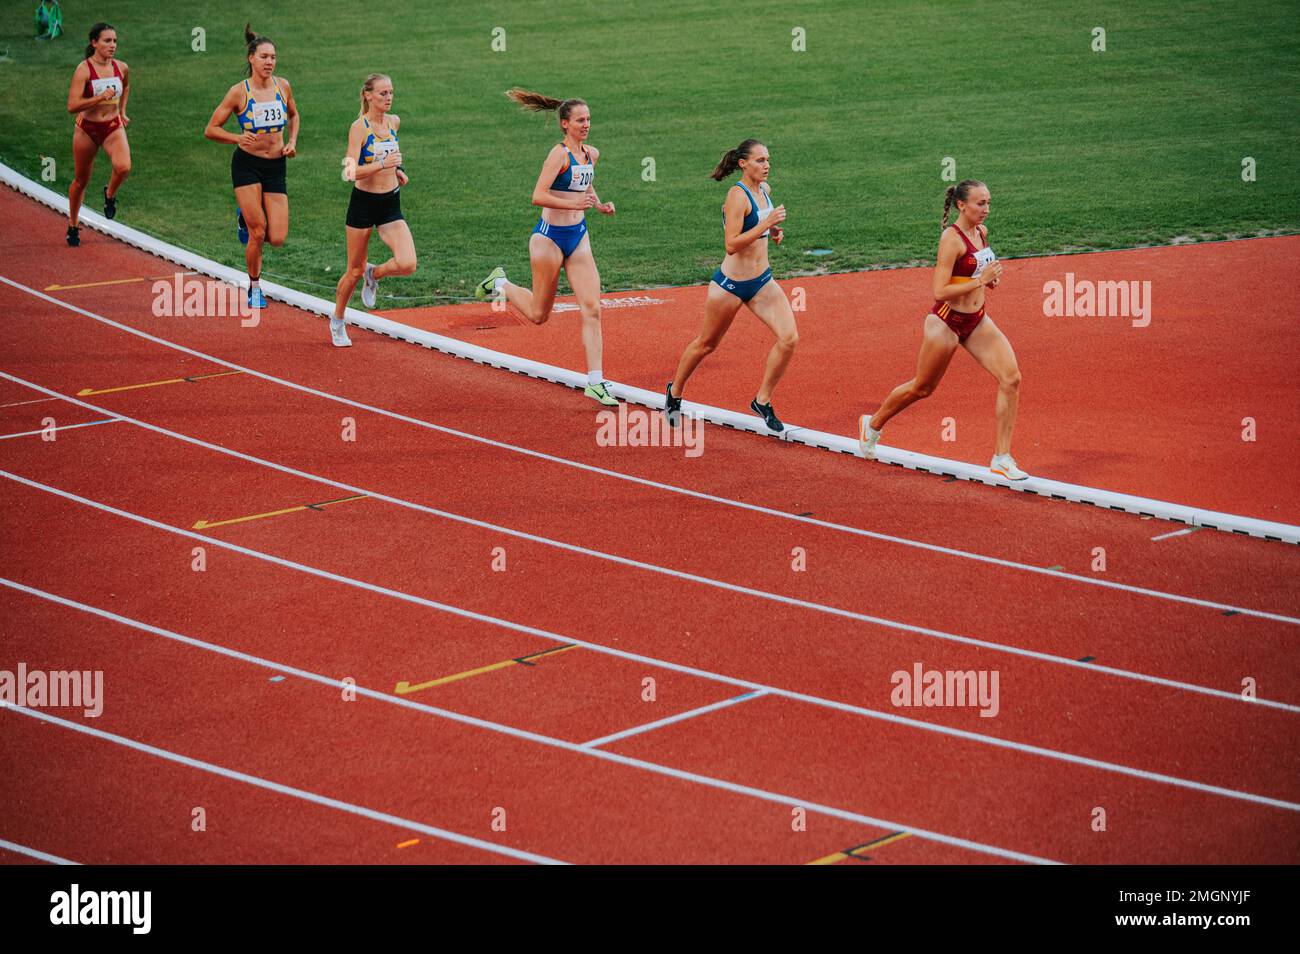 MARTIN, SLOVAKIA, 16 JULY, 2022: Female athletes pushing their limits during a 1500m race, highlighting the importance of physical and mental preparat Stock Photo